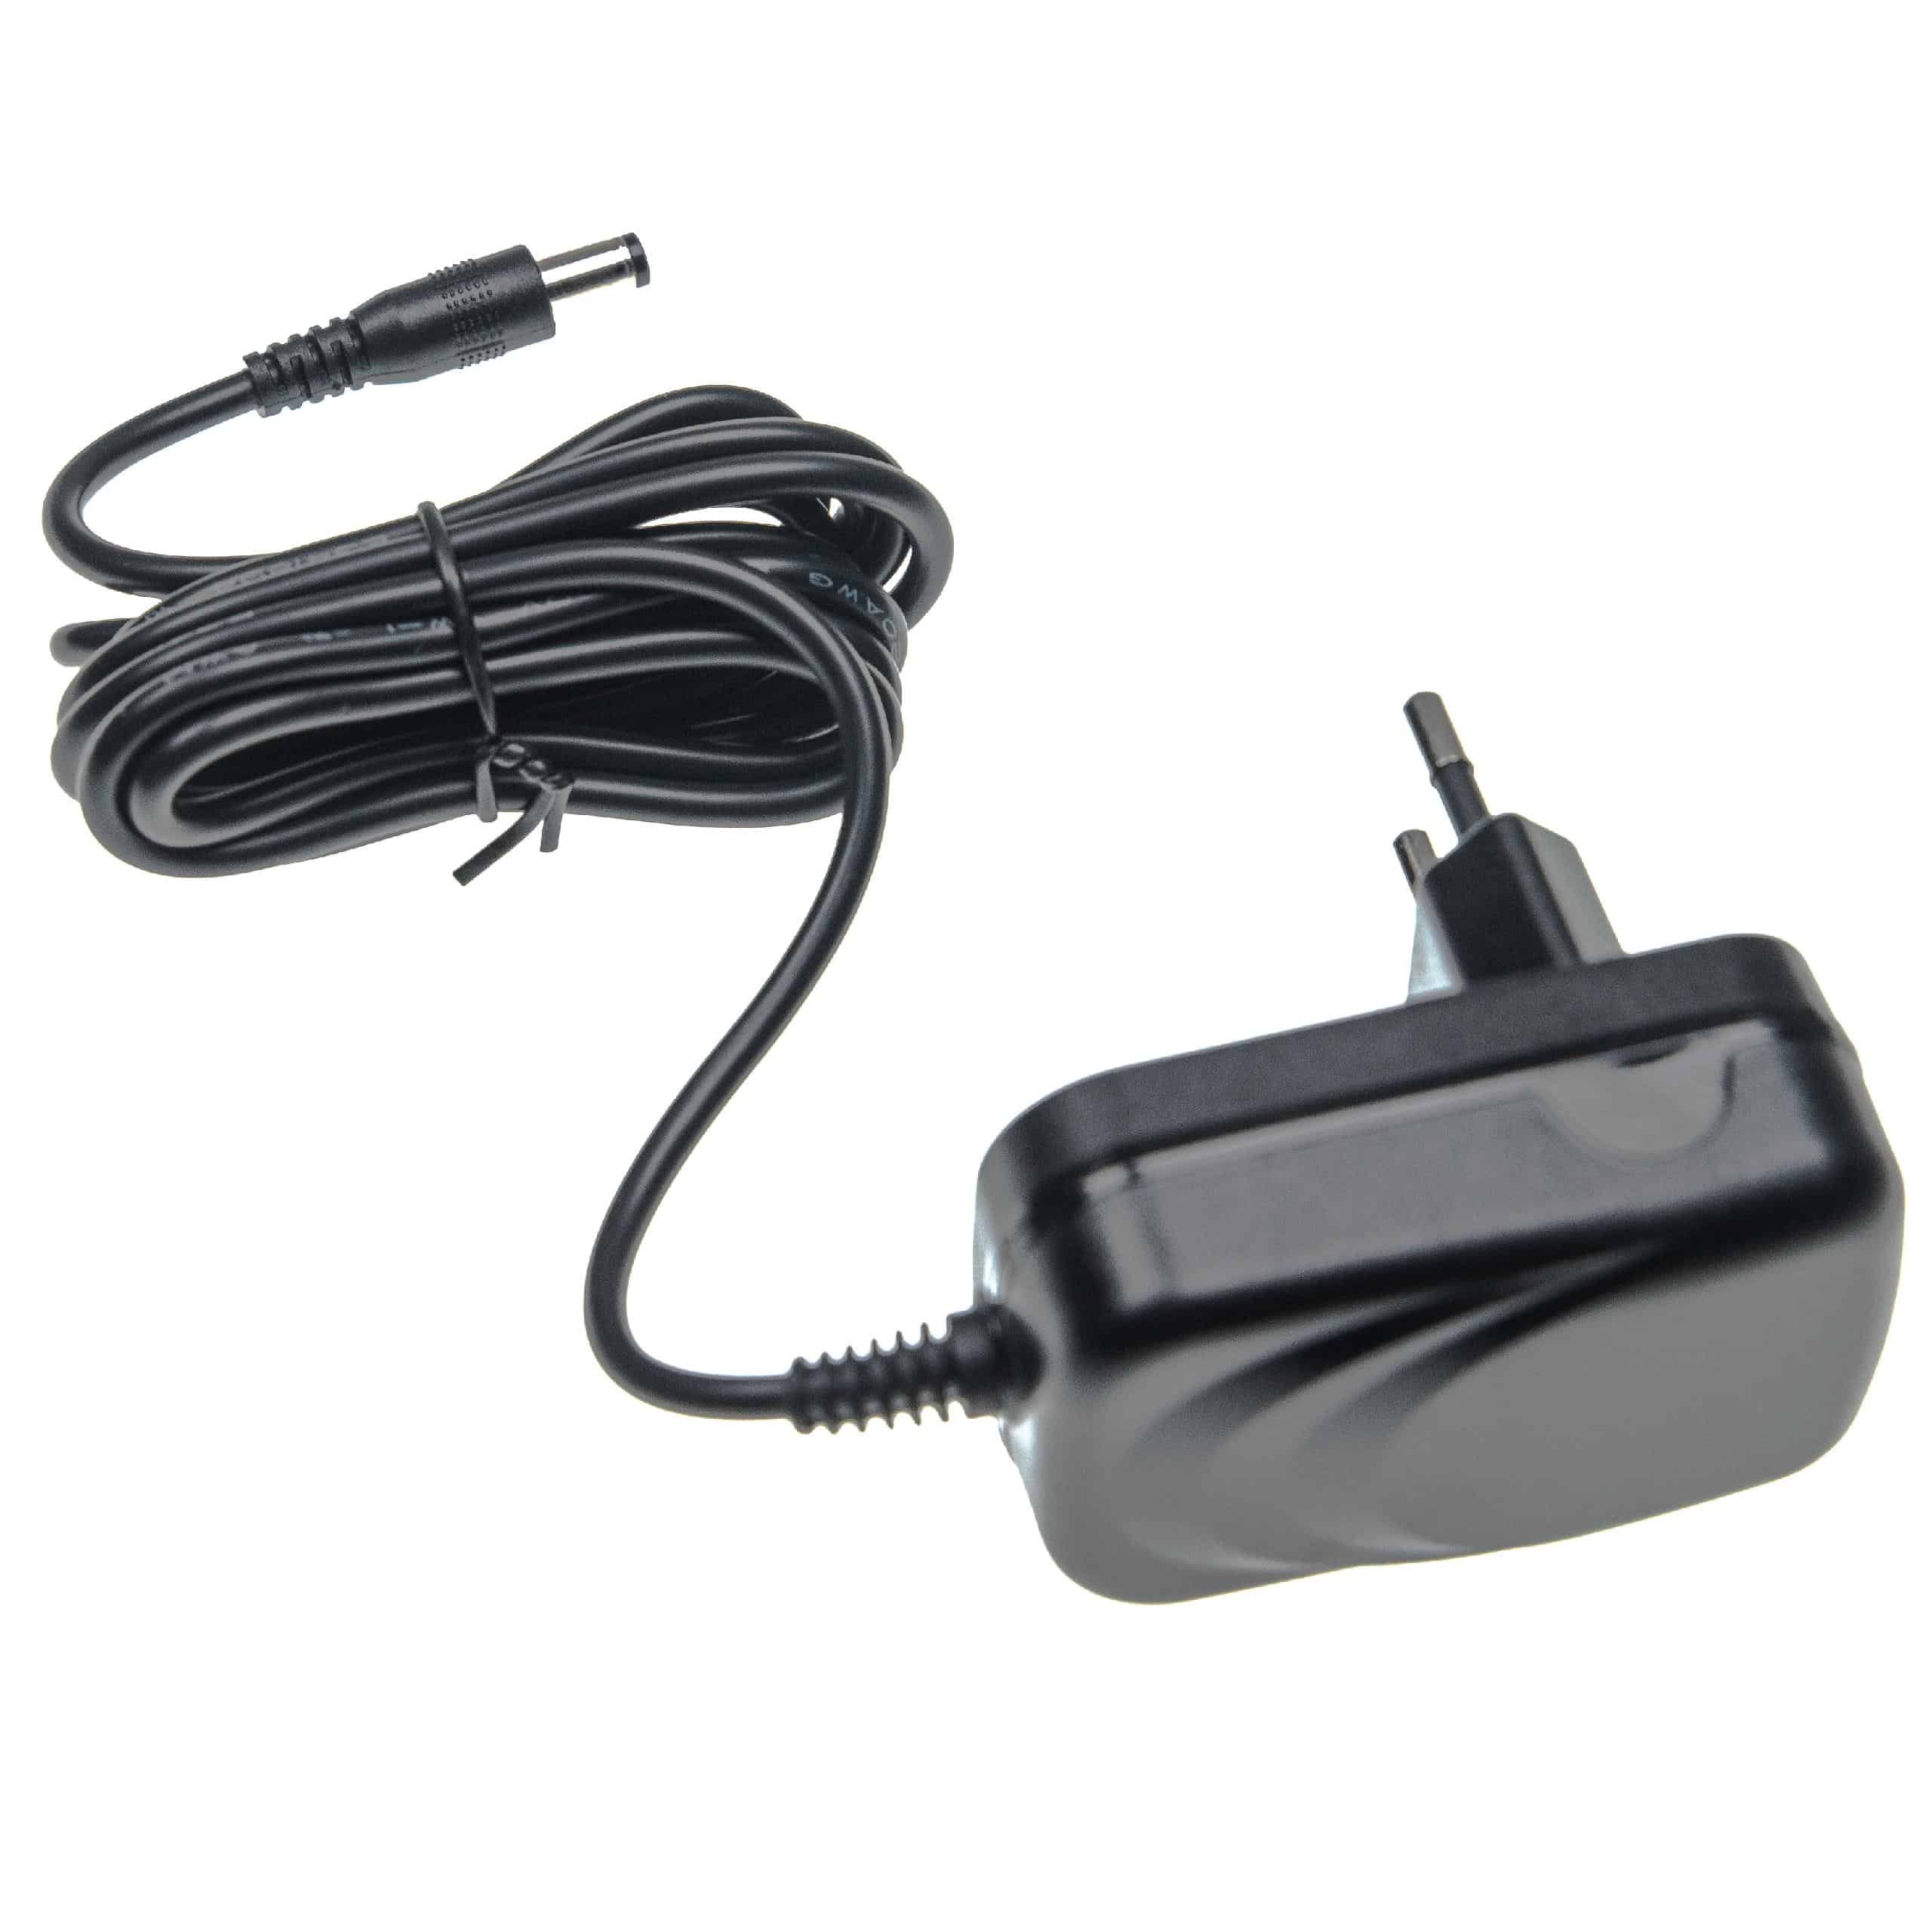 Mains Power Adapter suitable for Hyperice Hypervolt Massage Device - 26 V / 0.92 A 155 cm